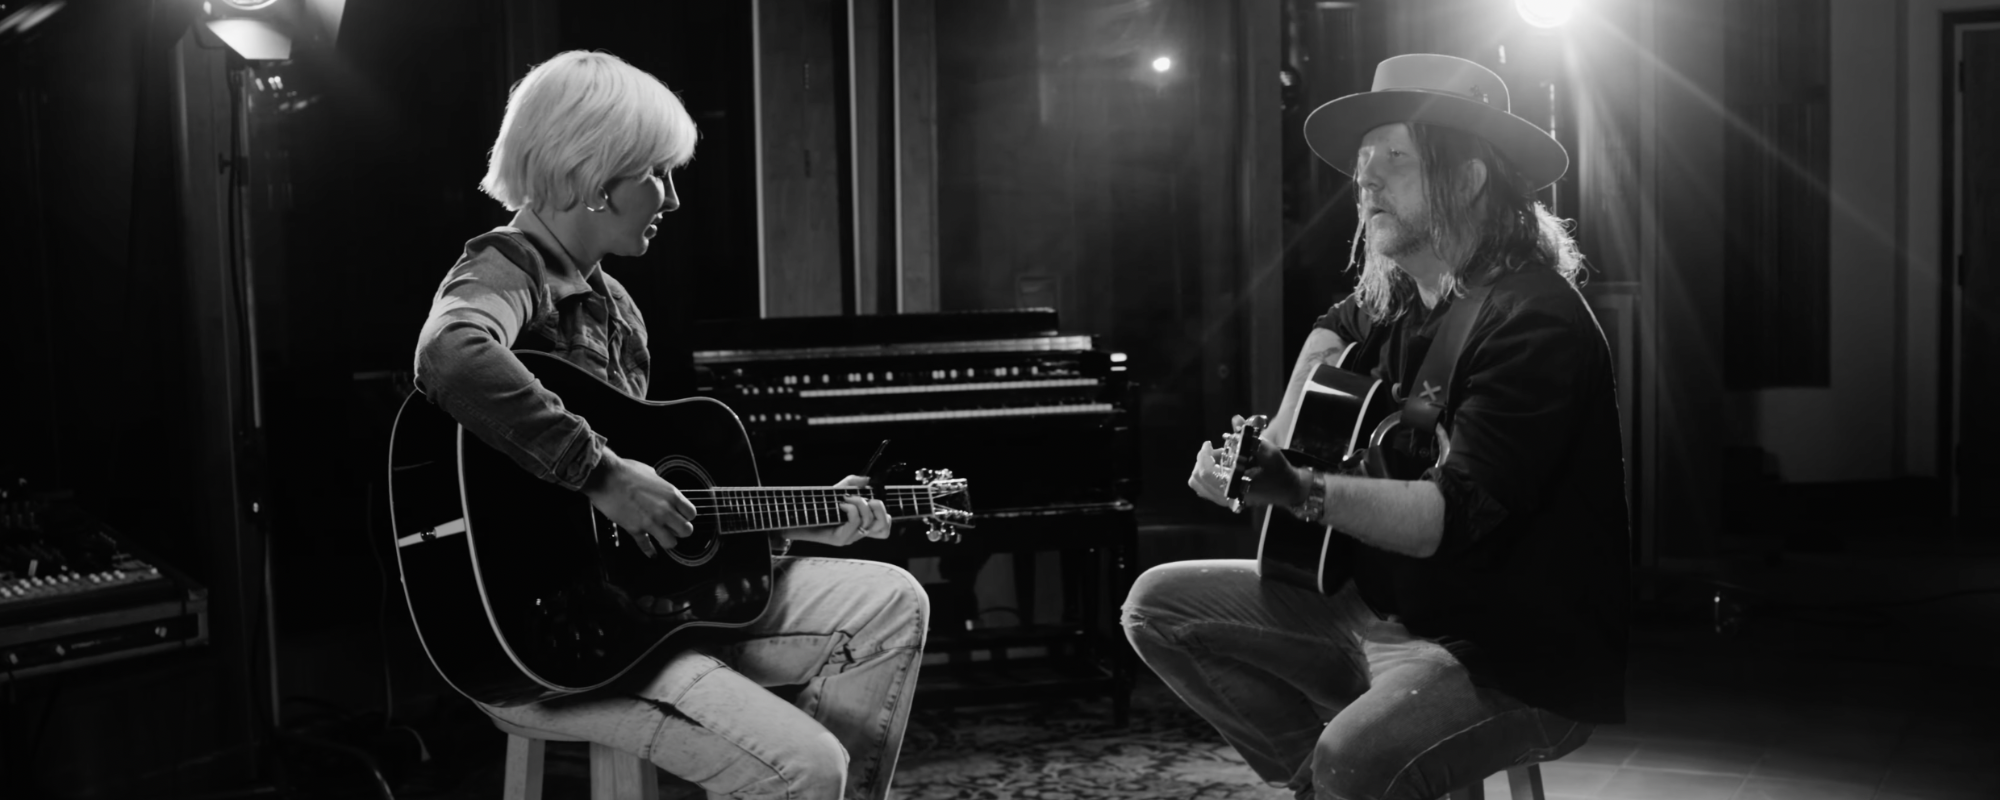 Devon Allman and Maggie Rose Share Dreamy Cover of “These Days”